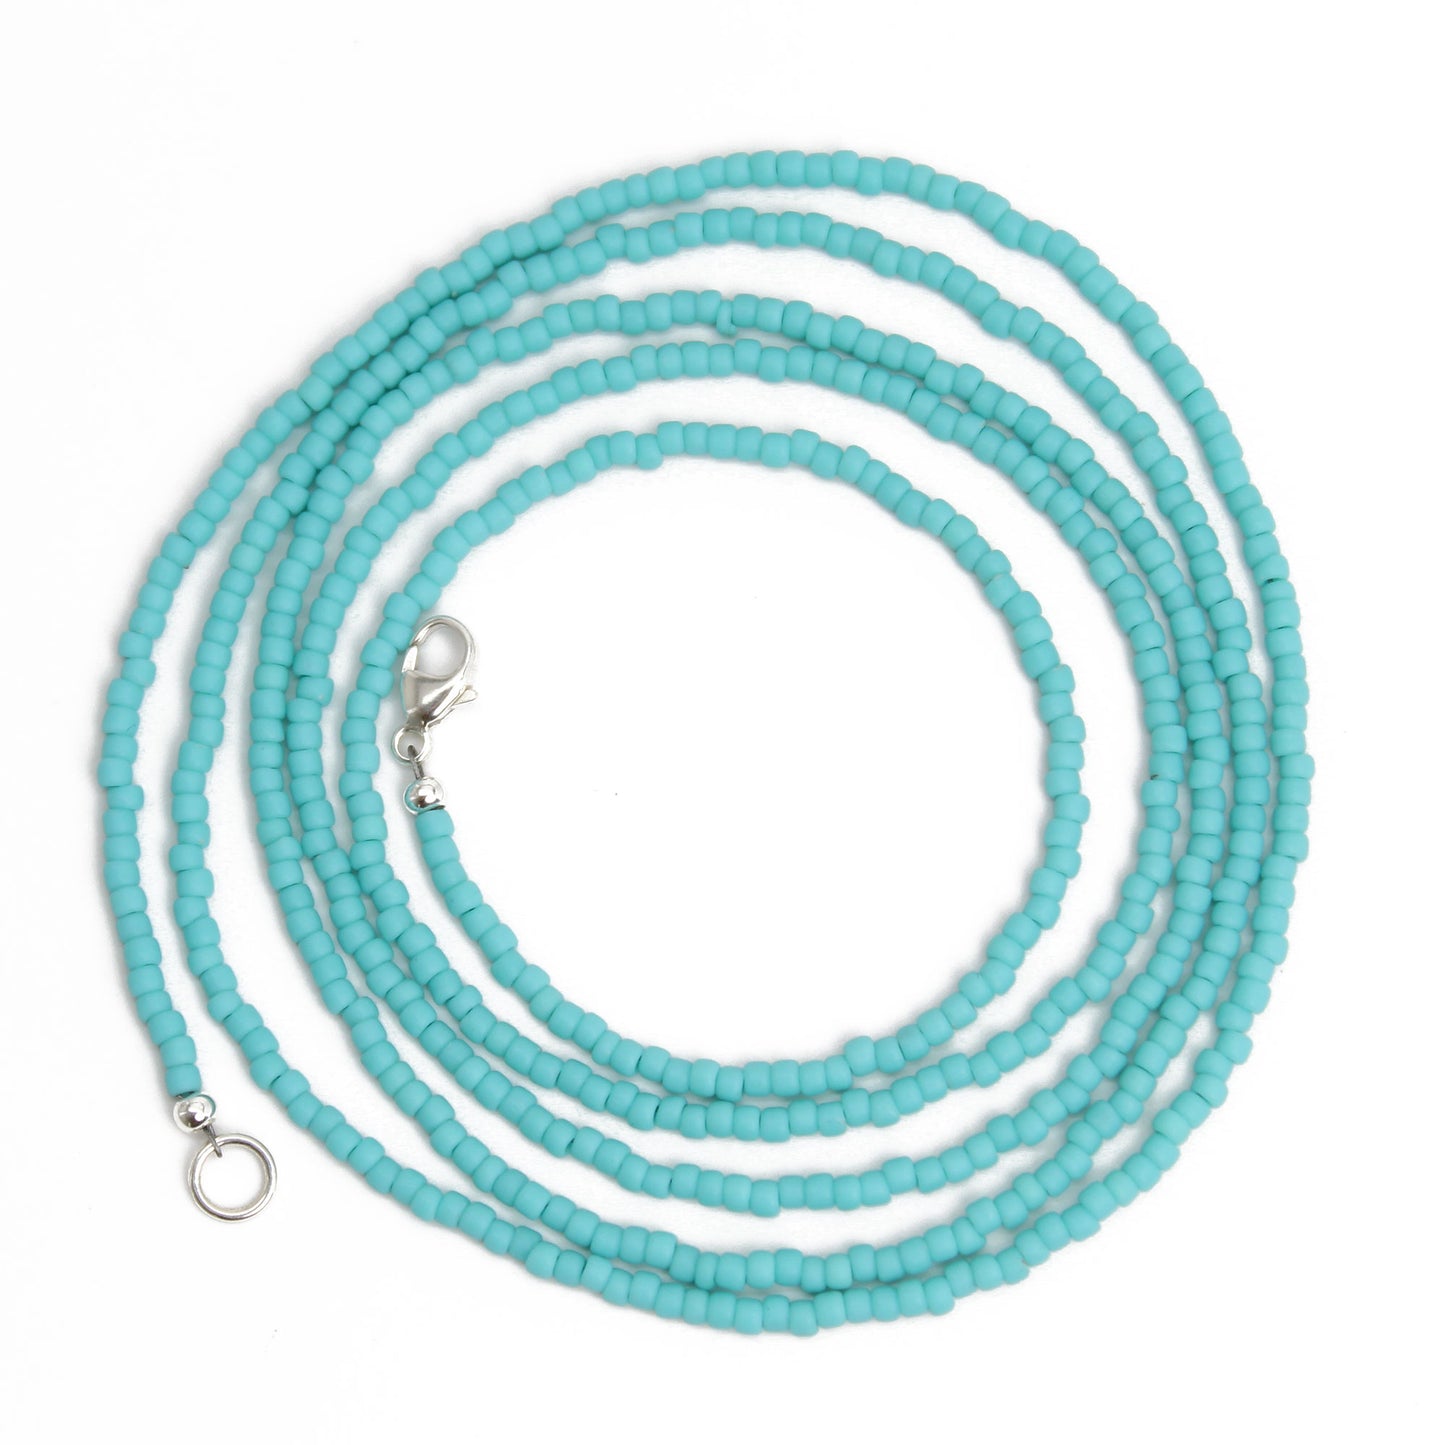 Turquoise Seed Bead Necklace Matte Finish, Thin 1.5mm Single Strand 14